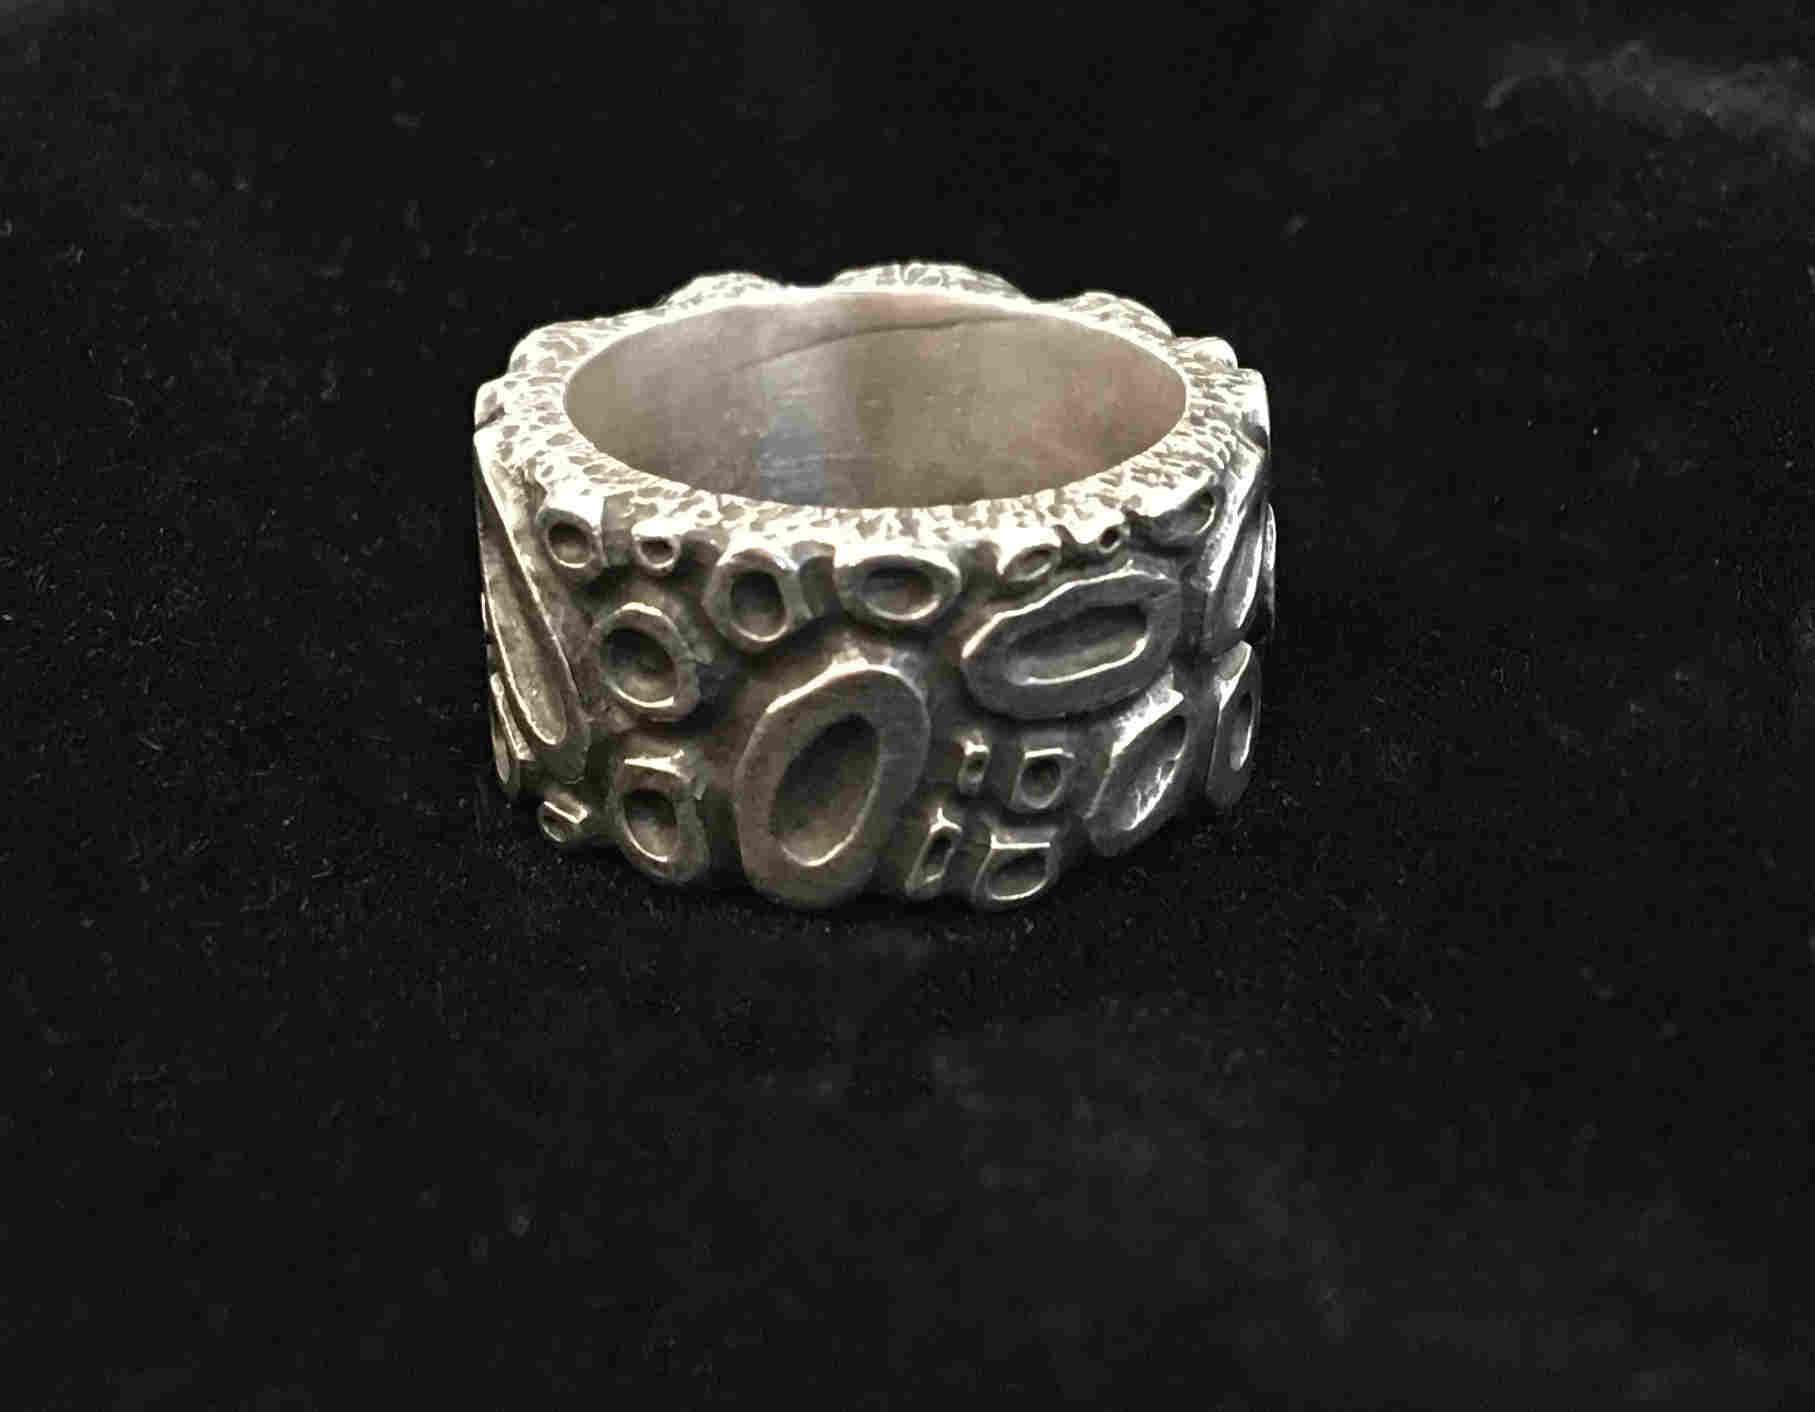 'Broad Sterling Silver Carved Band' by artist Carol Docherty